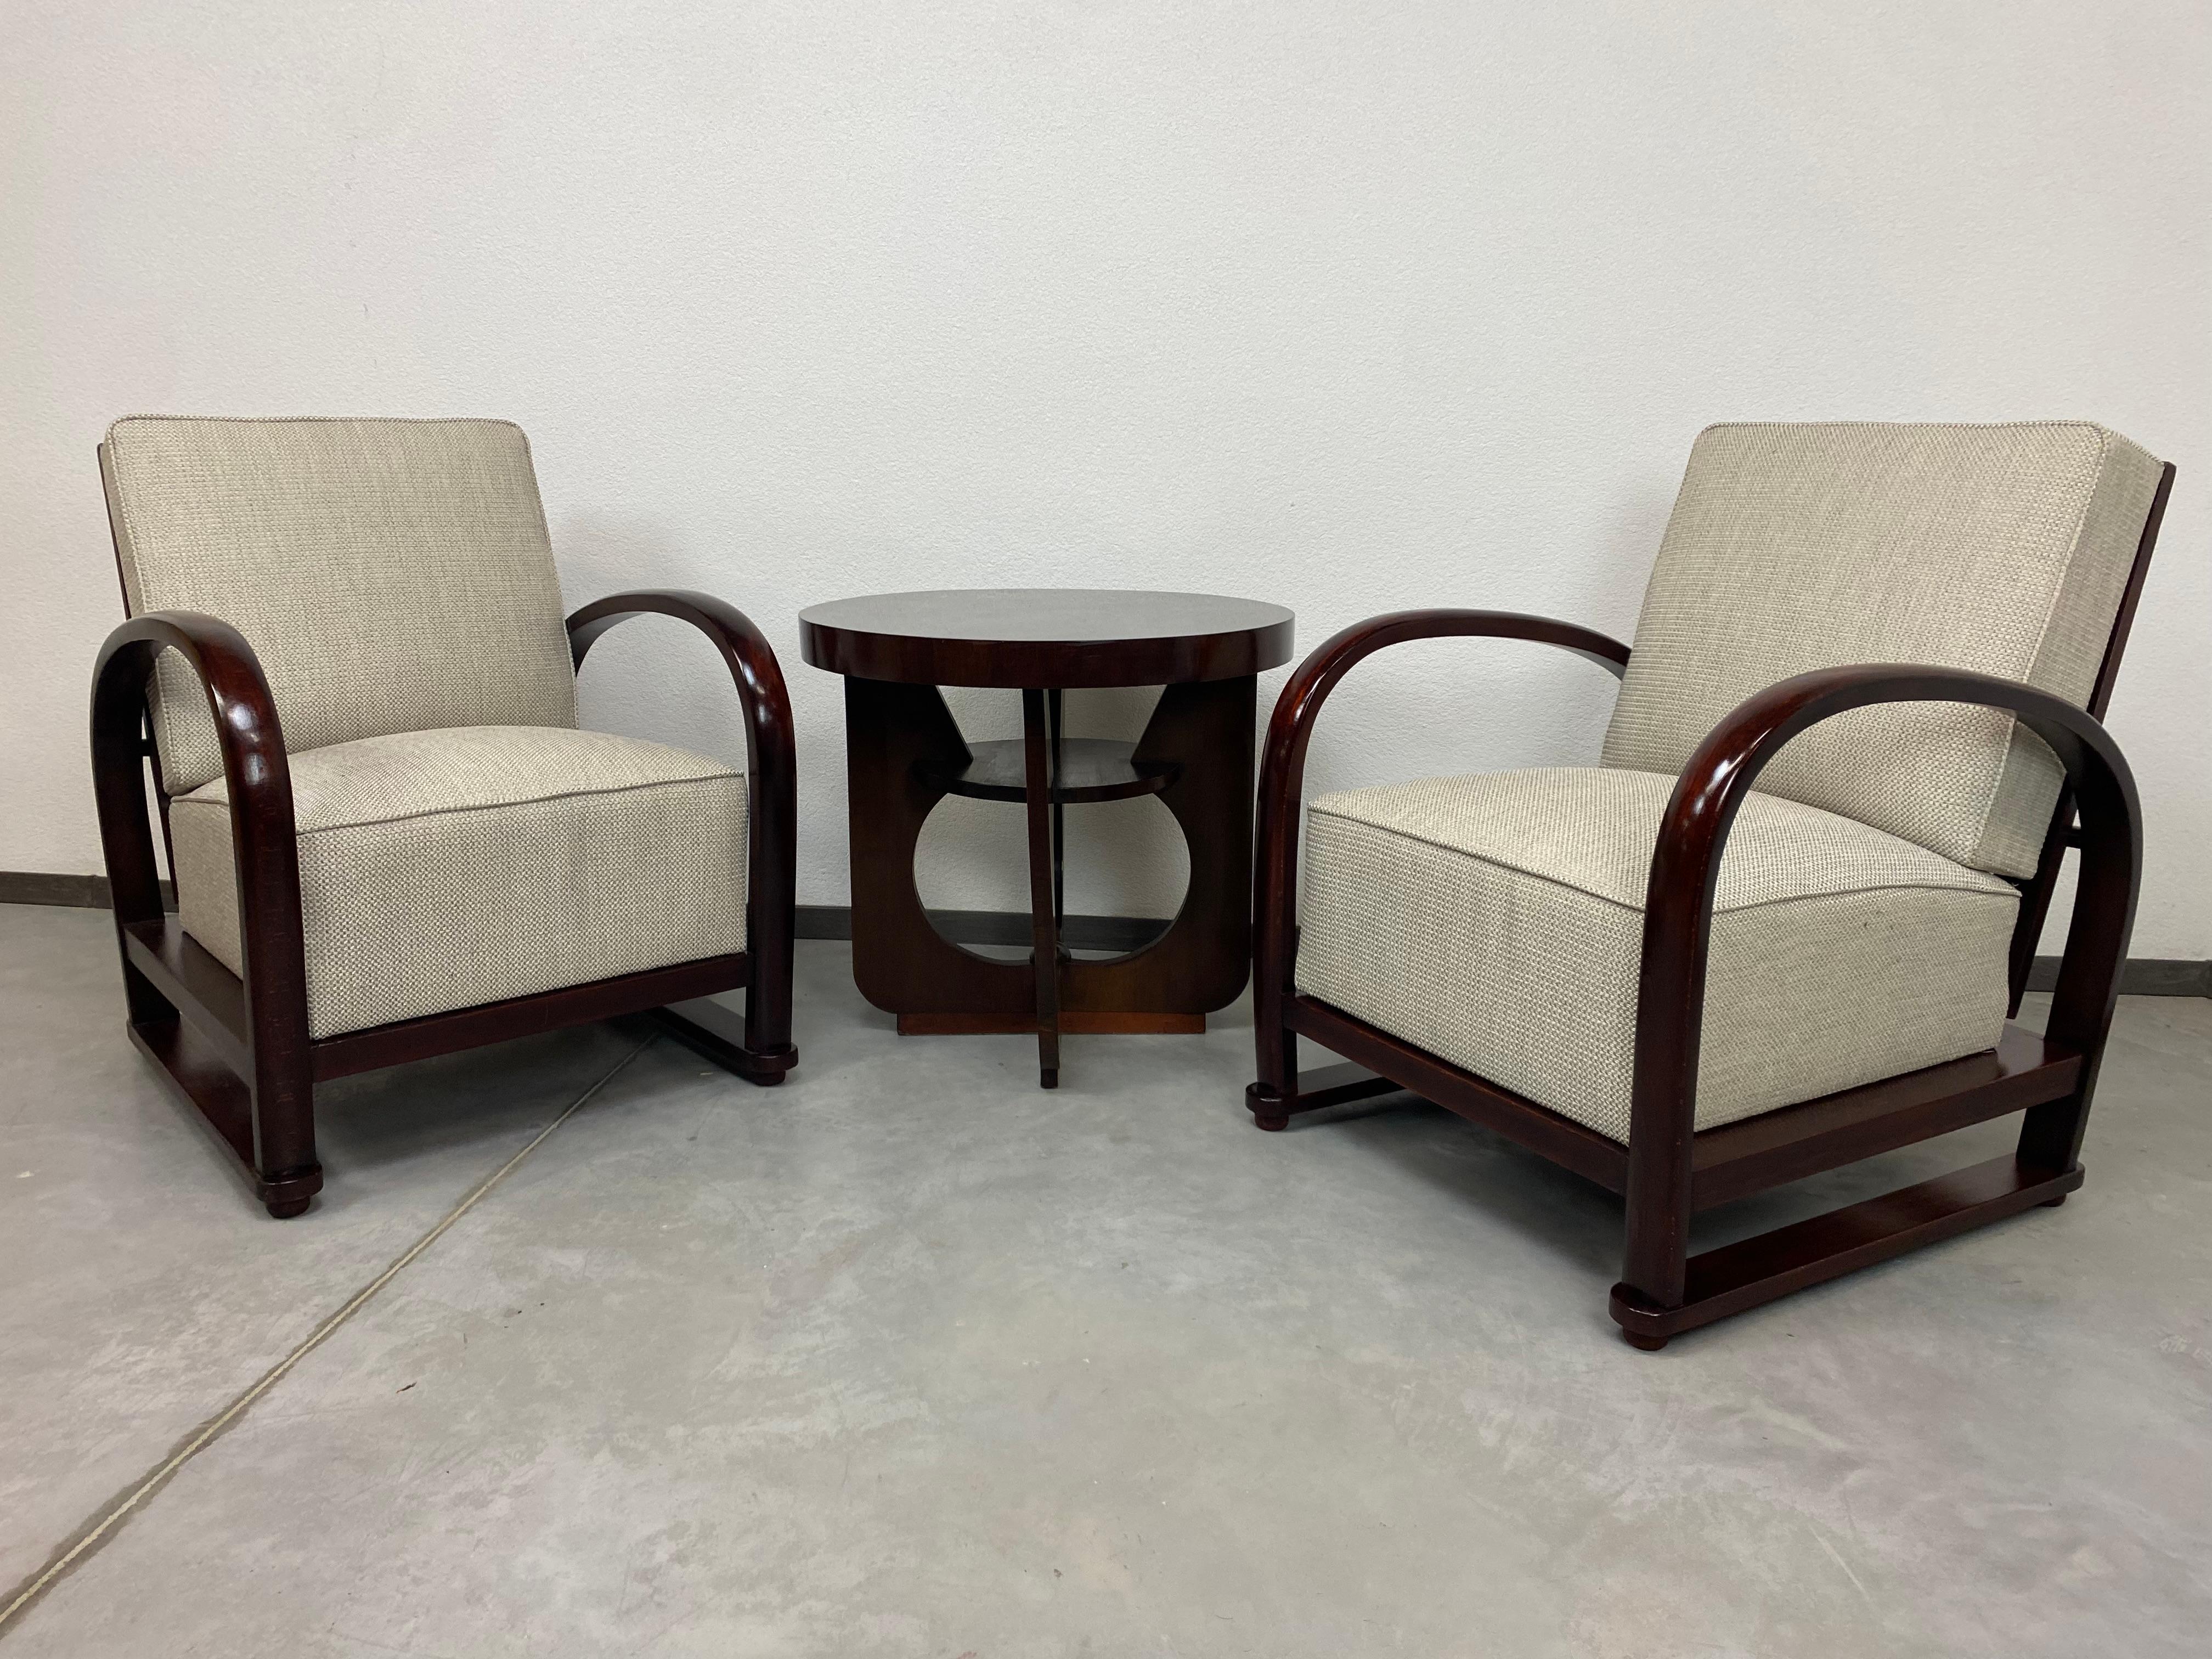 Very rare secession adjustalble armchairs in style of Wiener Werkstatte by Pancota Vienna, professionally stained and repolished.